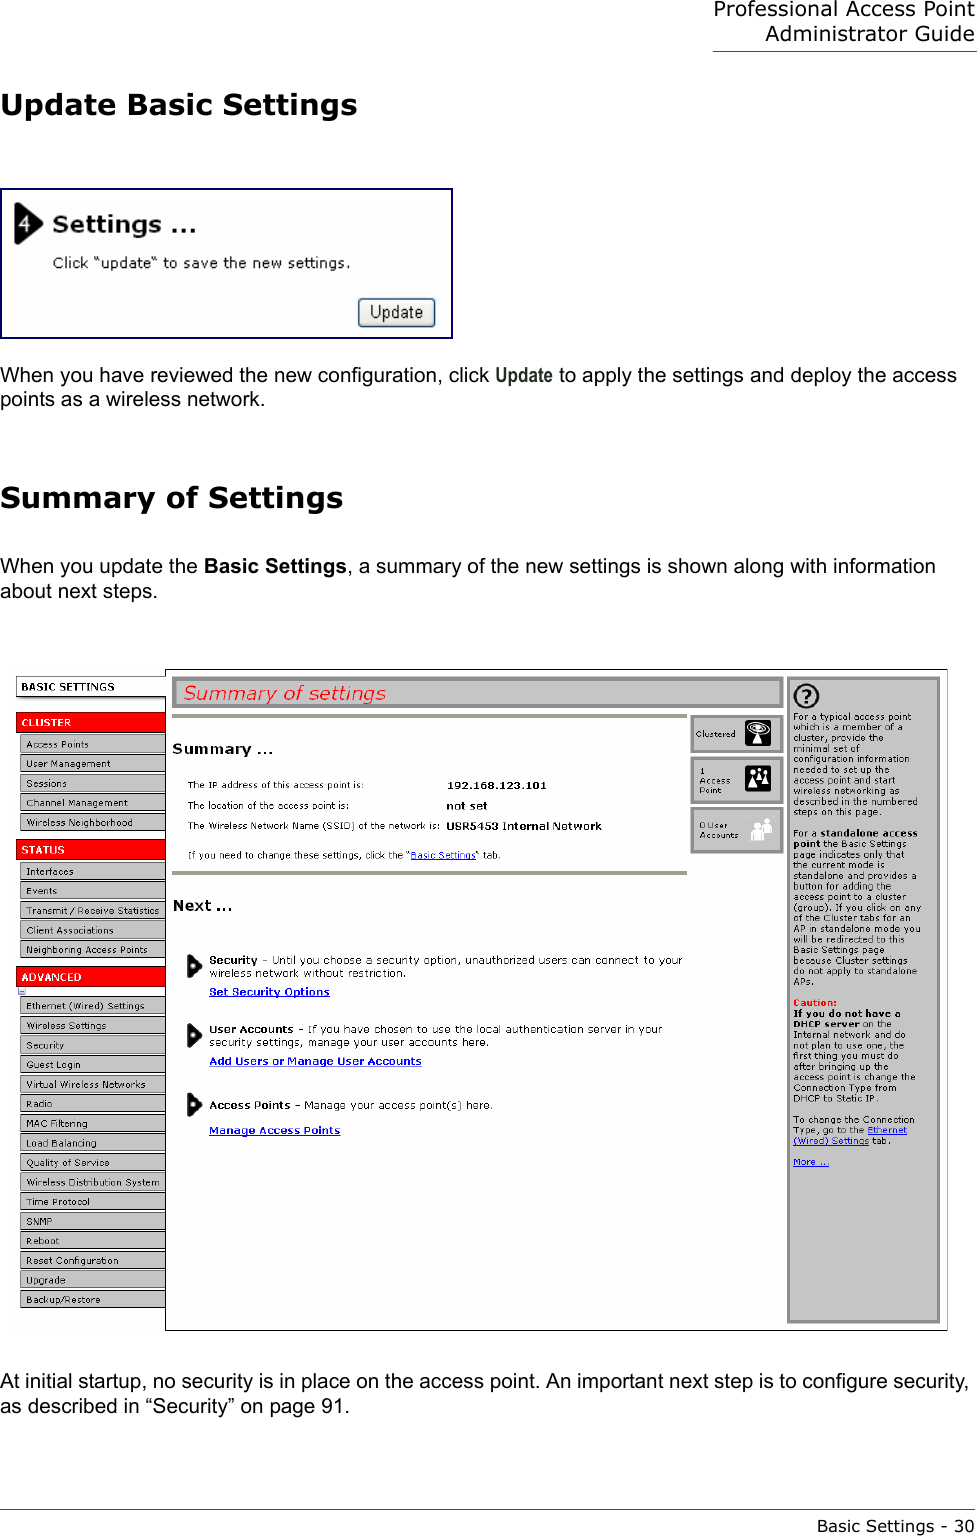 Professional Access Point Administrator GuideBasic Settings - 30Update Basic SettingsWhen you have reviewed the new configuration, click Update to apply the settings and deploy the access points as a wireless network.Summary of SettingsWhen you update the Basic Settings, a summary of the new settings is shown along with information about next steps.At initial startup, no security is in place on the access point. An important next step is to configure security, as described in “Security” on page 91.